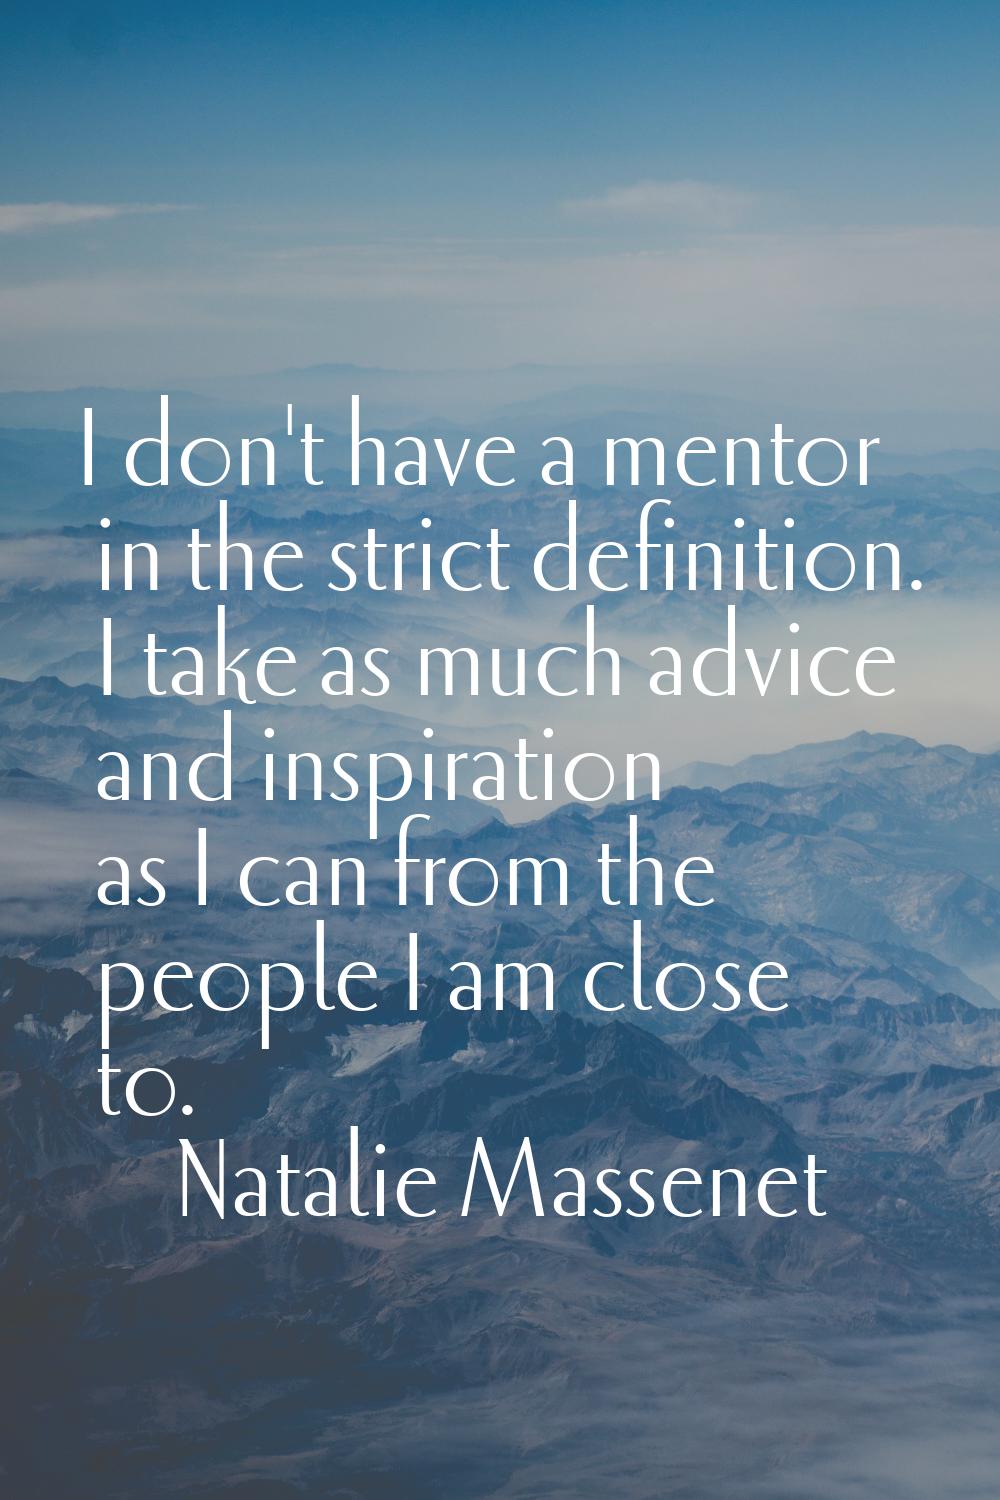 I don't have a mentor in the strict definition. I take as much advice and inspiration as I can from